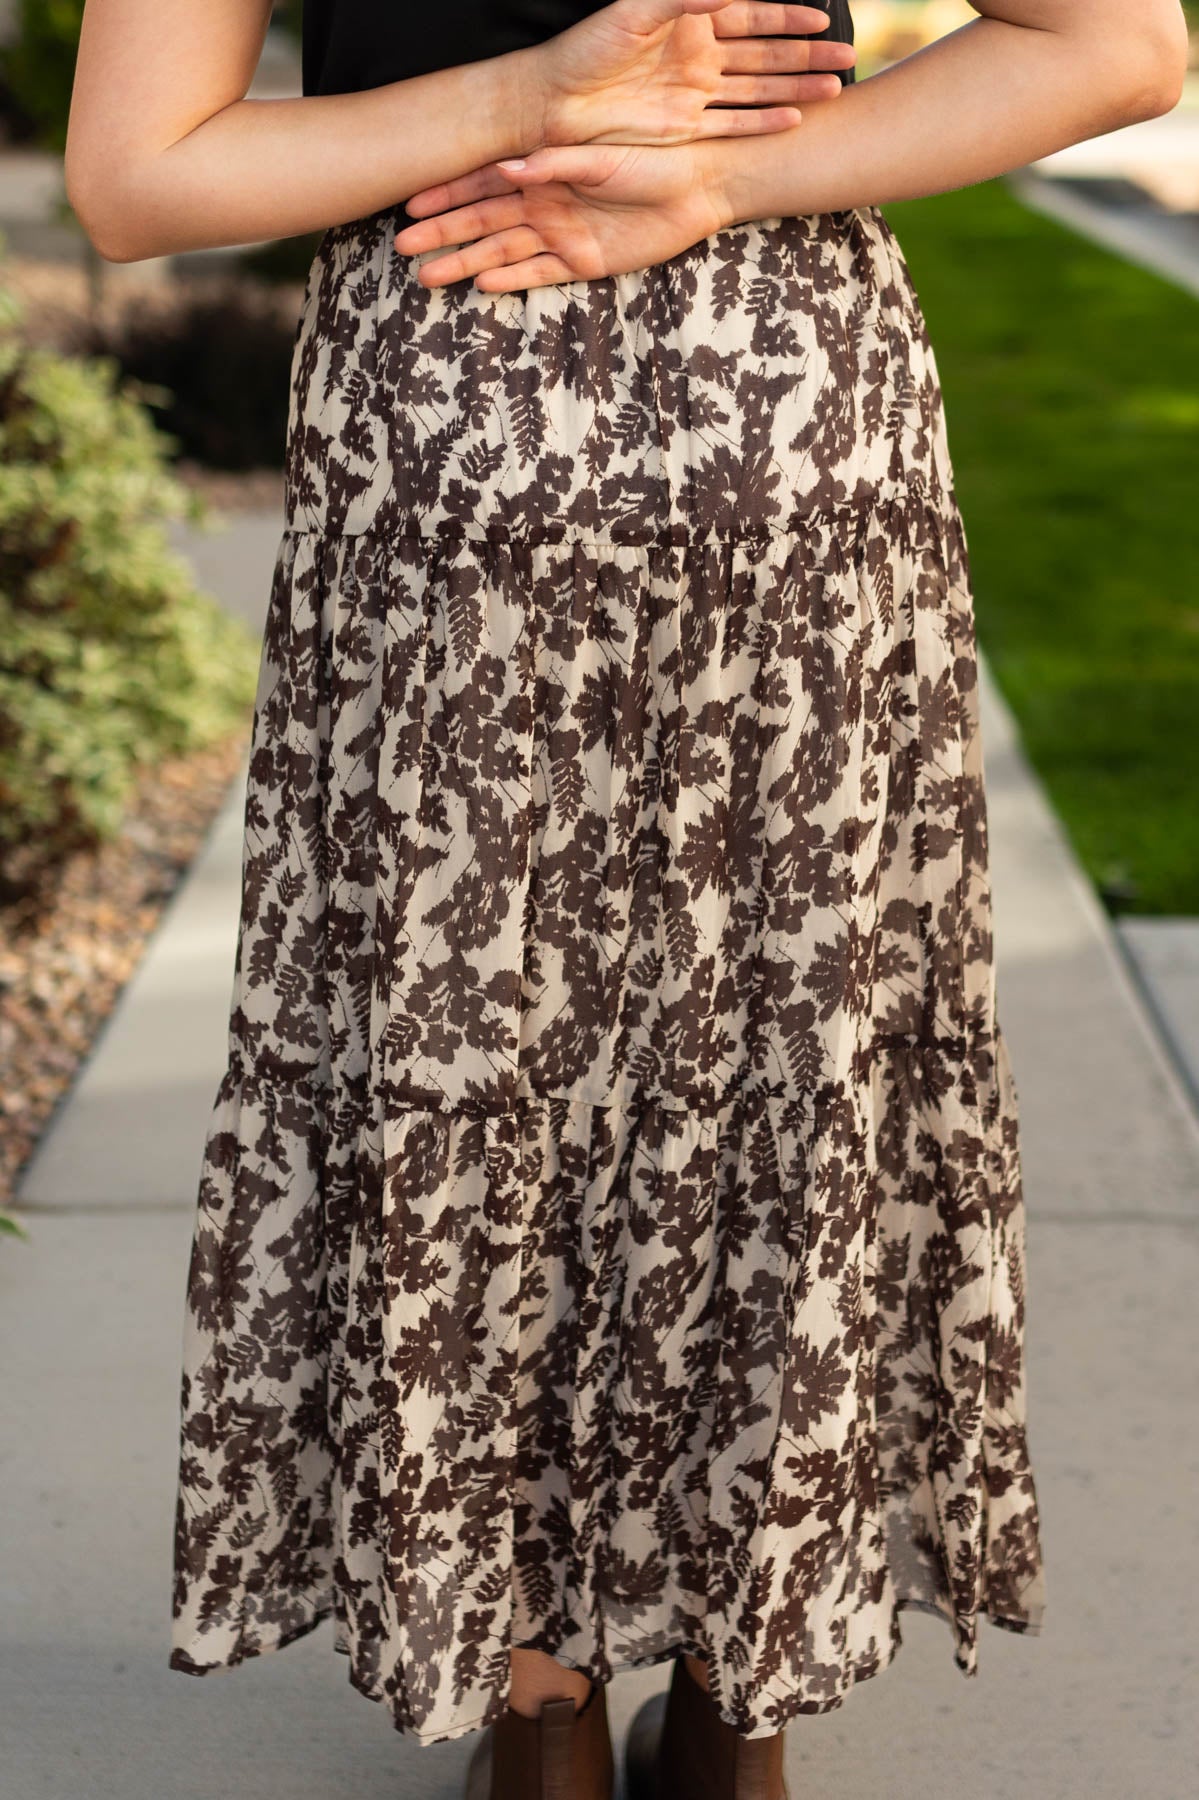 Back view of a brown floral skirt